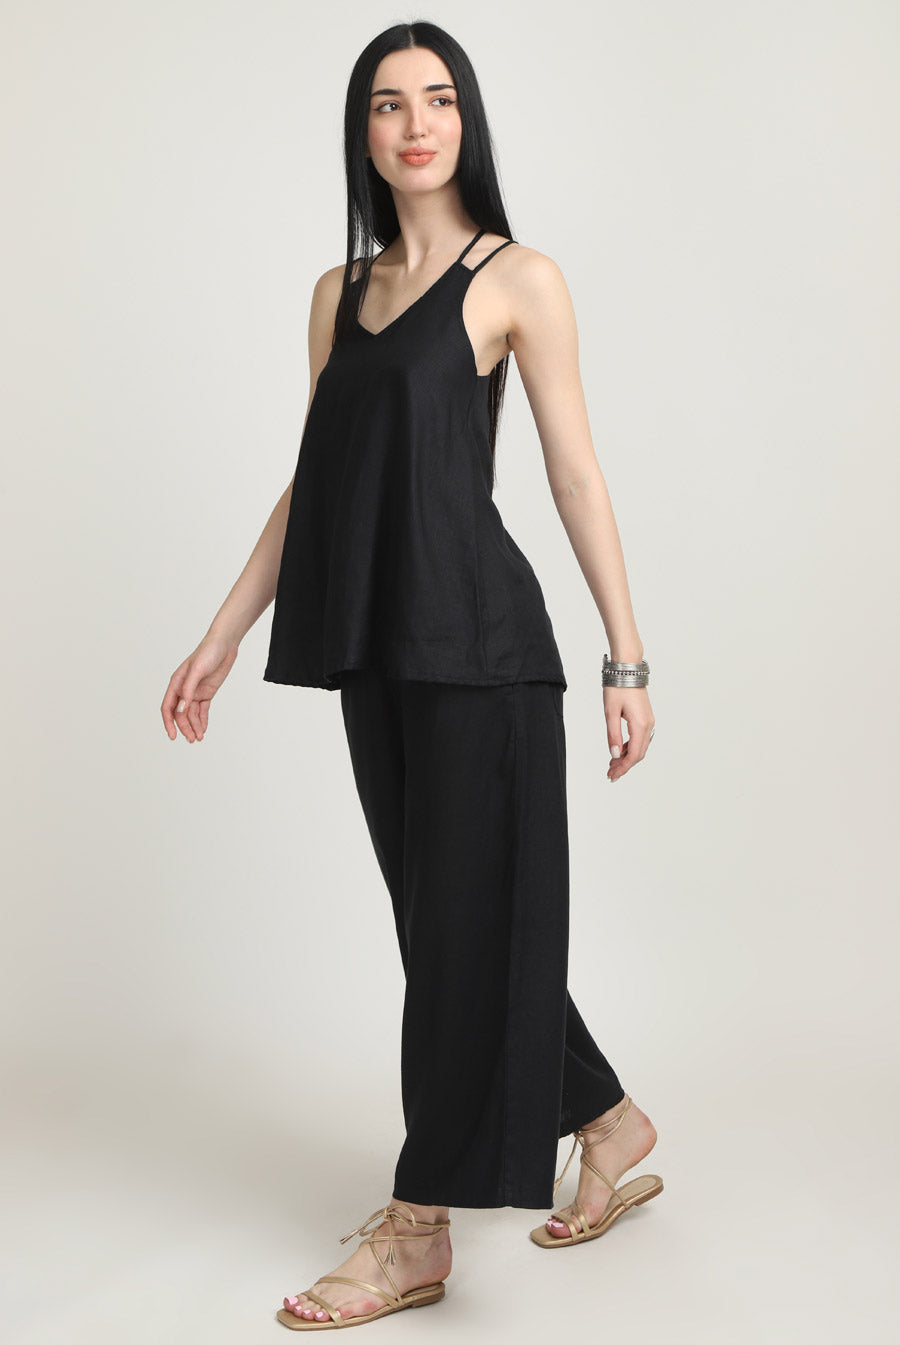 Girl in black strap top and black 100% linen pants